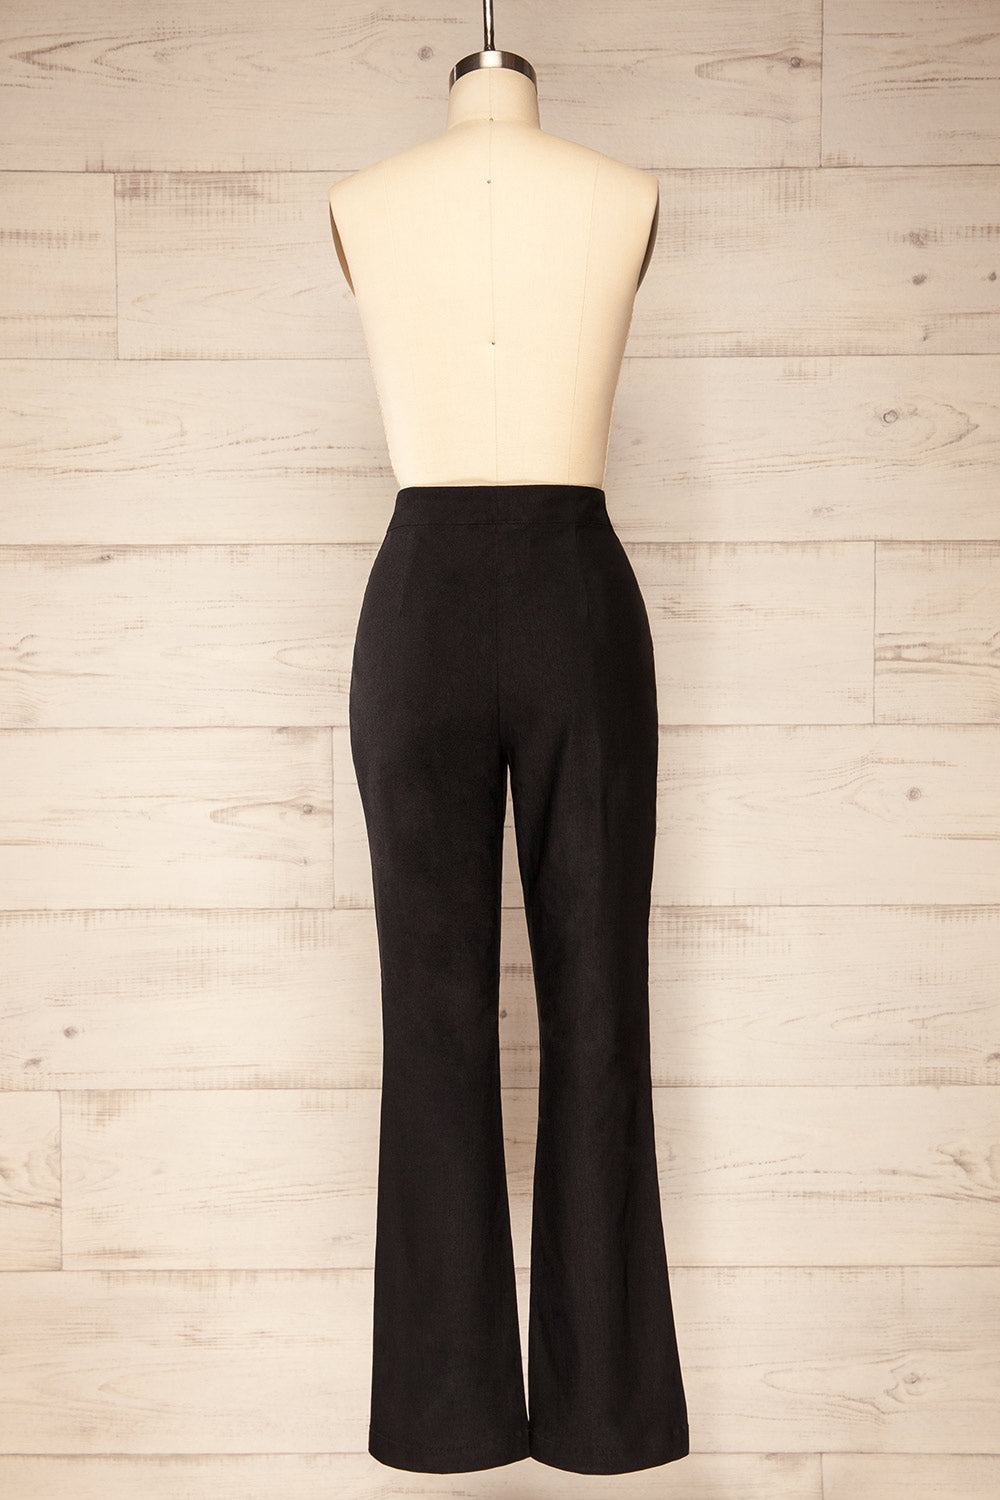 Asuncion High-Waisted Black Fitted Pants